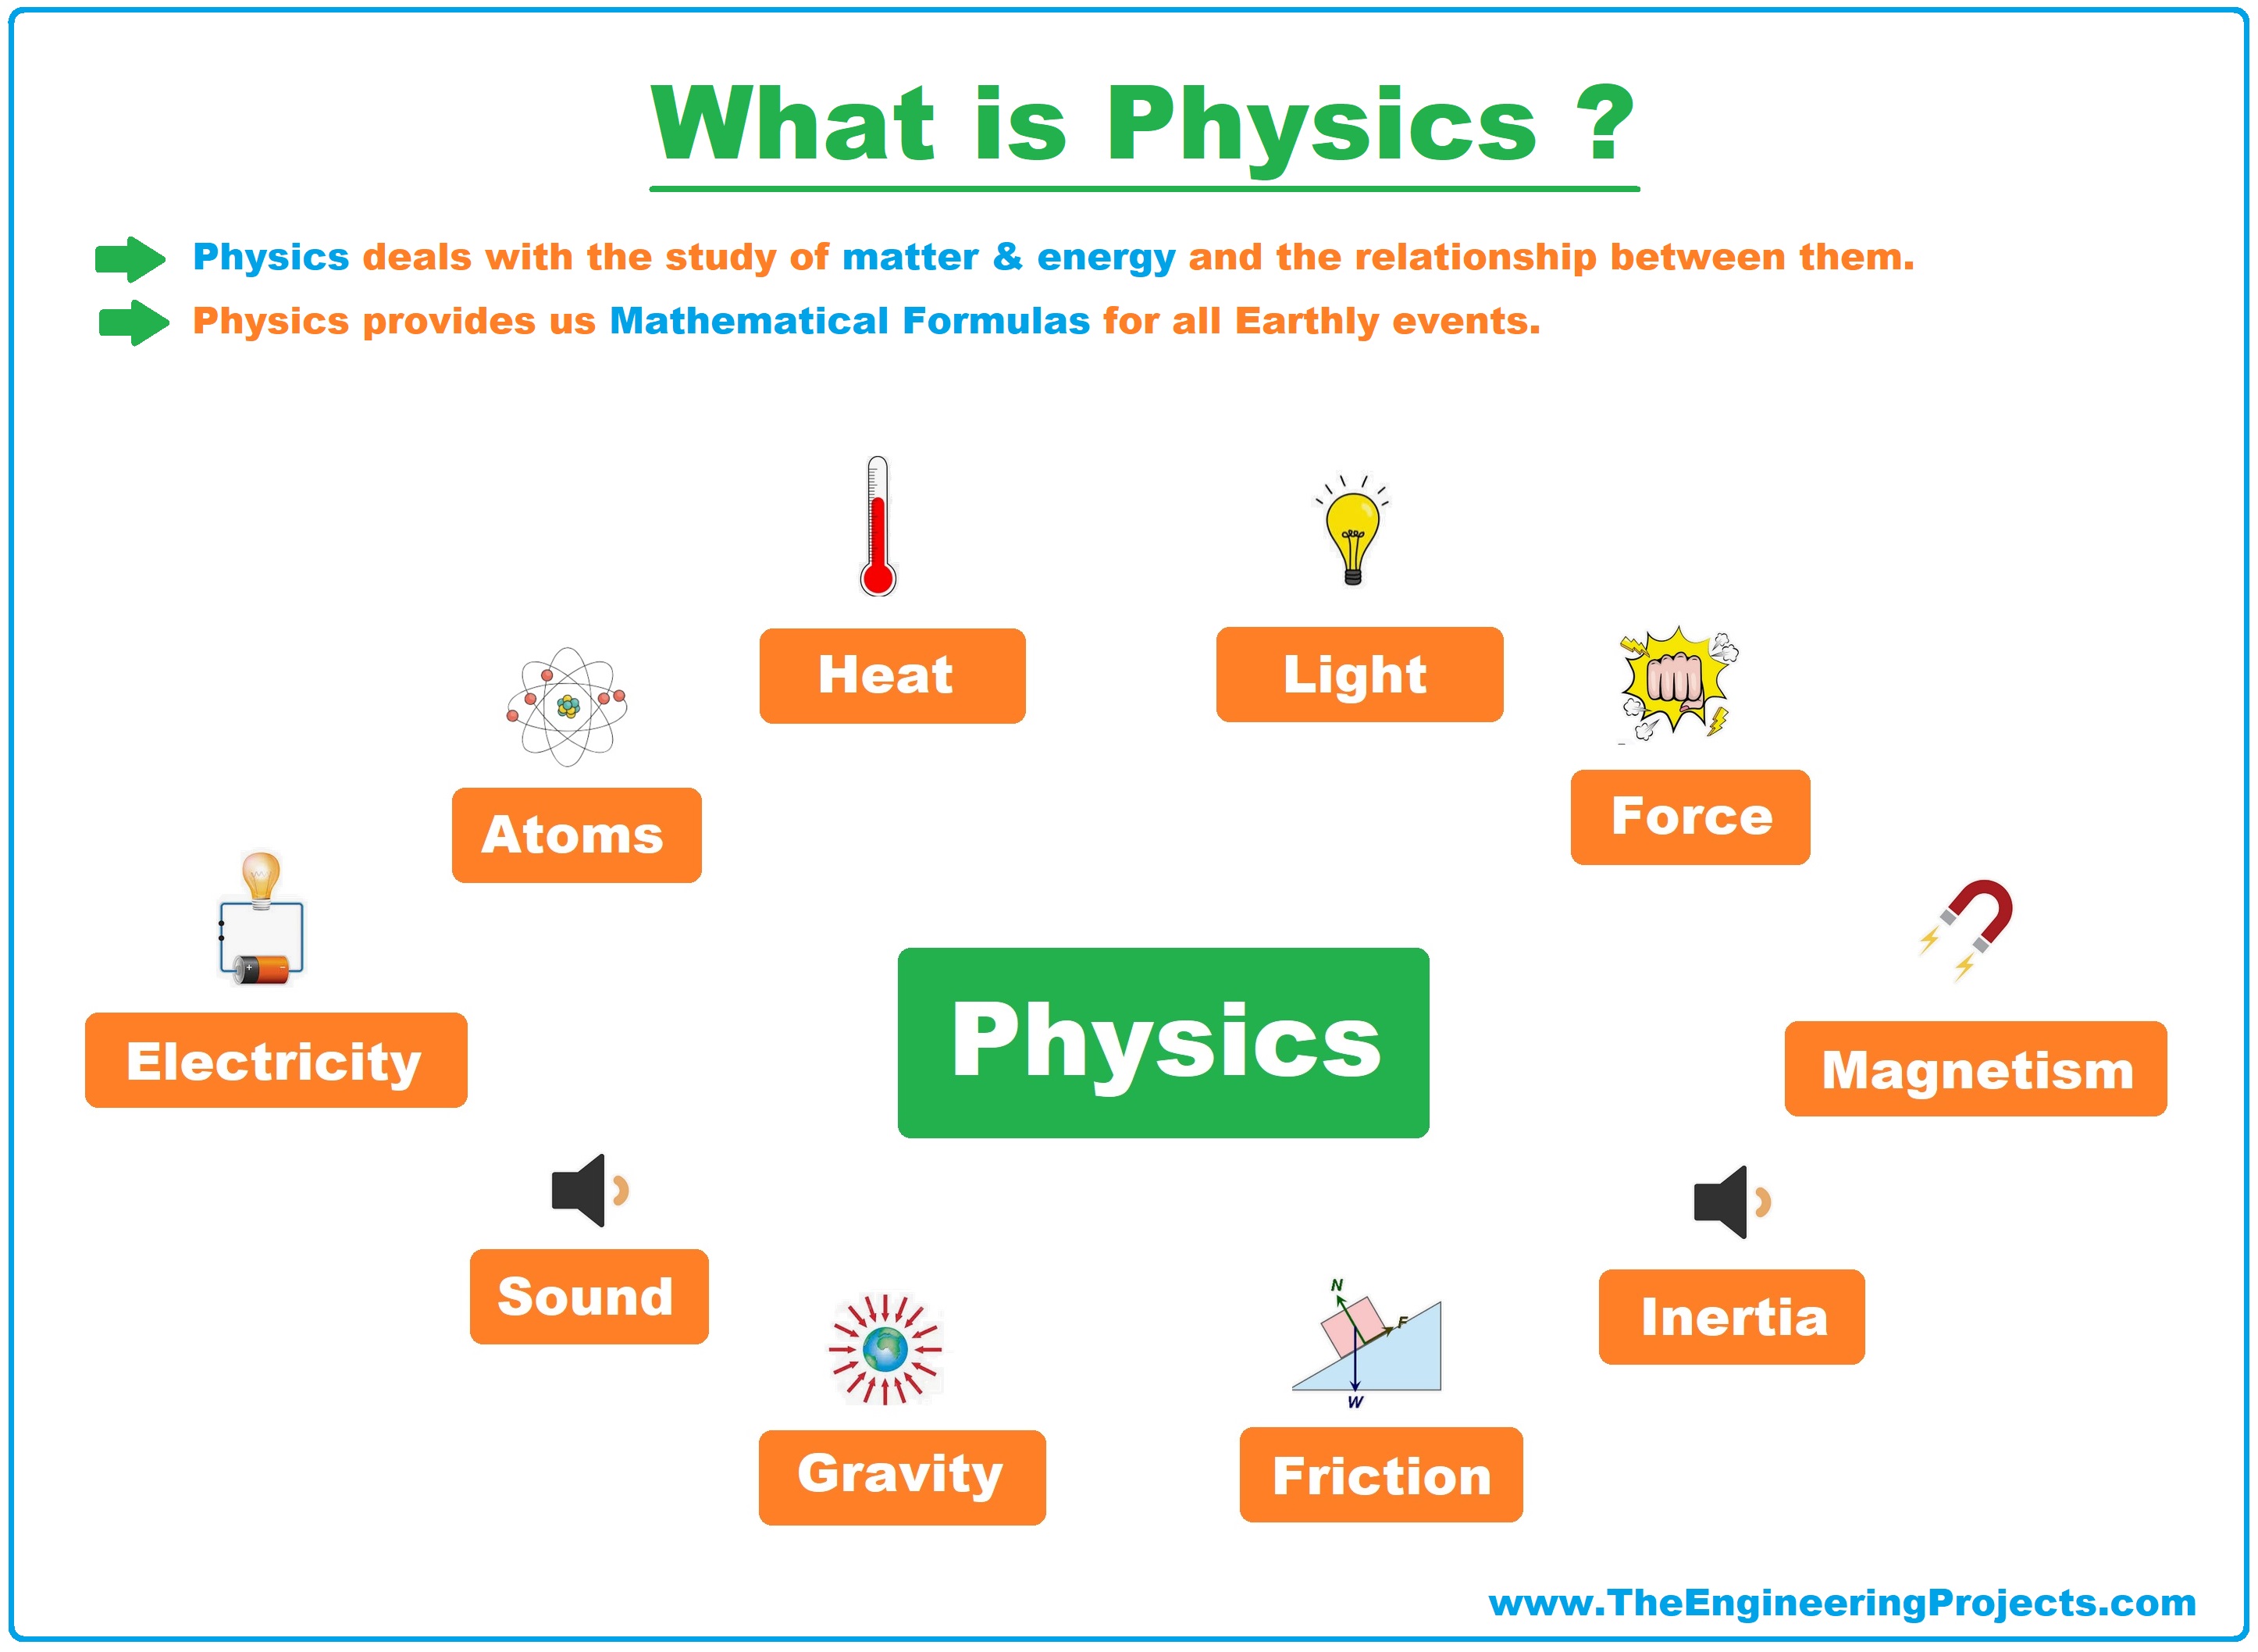 Physics, what is Physics, Physics branches, why is Physics important, physics definition, physics books, physics scientists, physicists